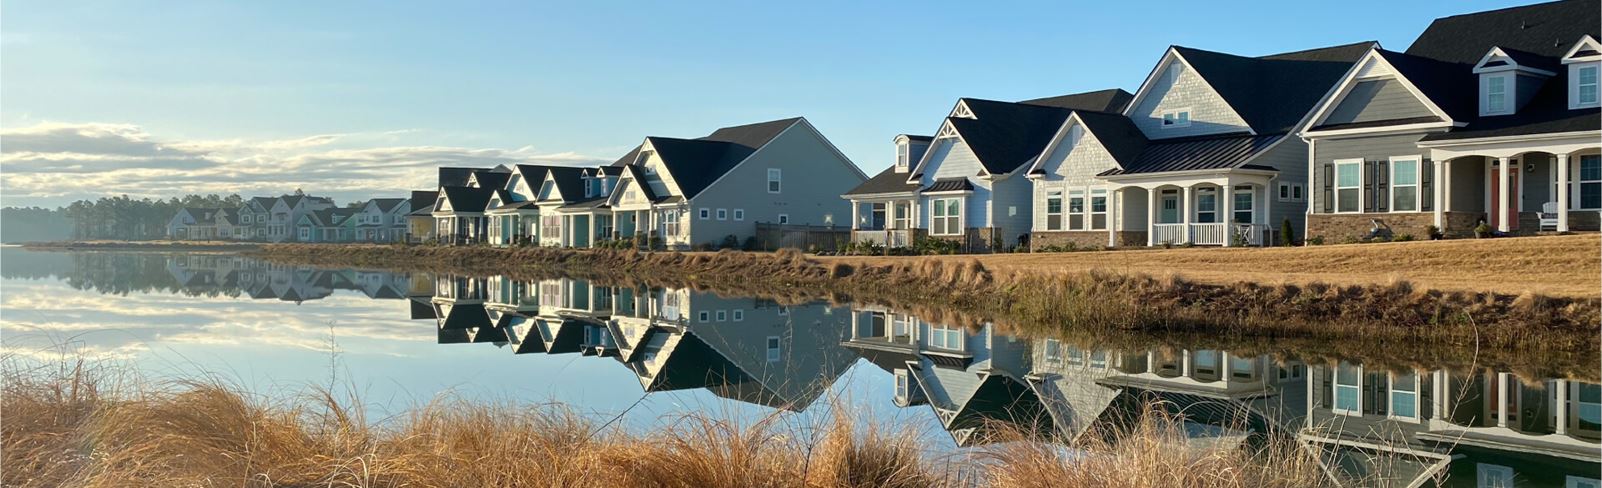 New homes overlooking a lake in Riverlights, new homes in Wilmington NC.